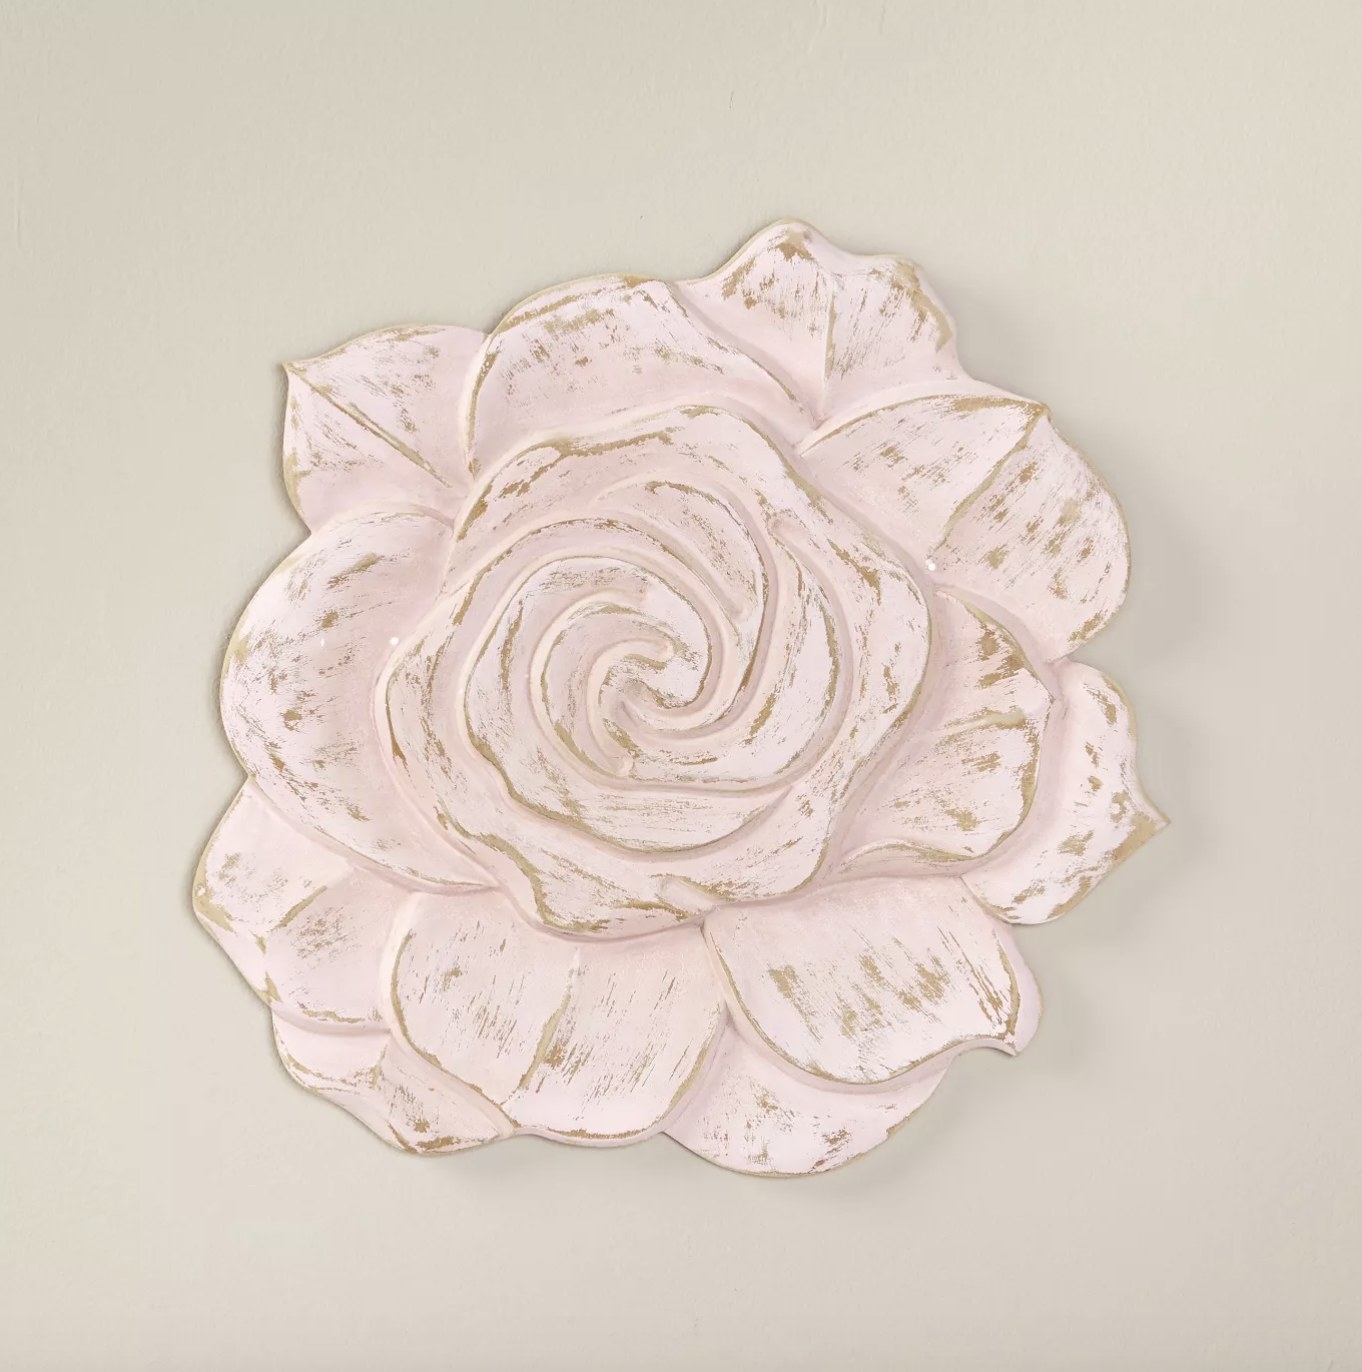 The carved flower has a light pink wash and vintage look on a neutral wall